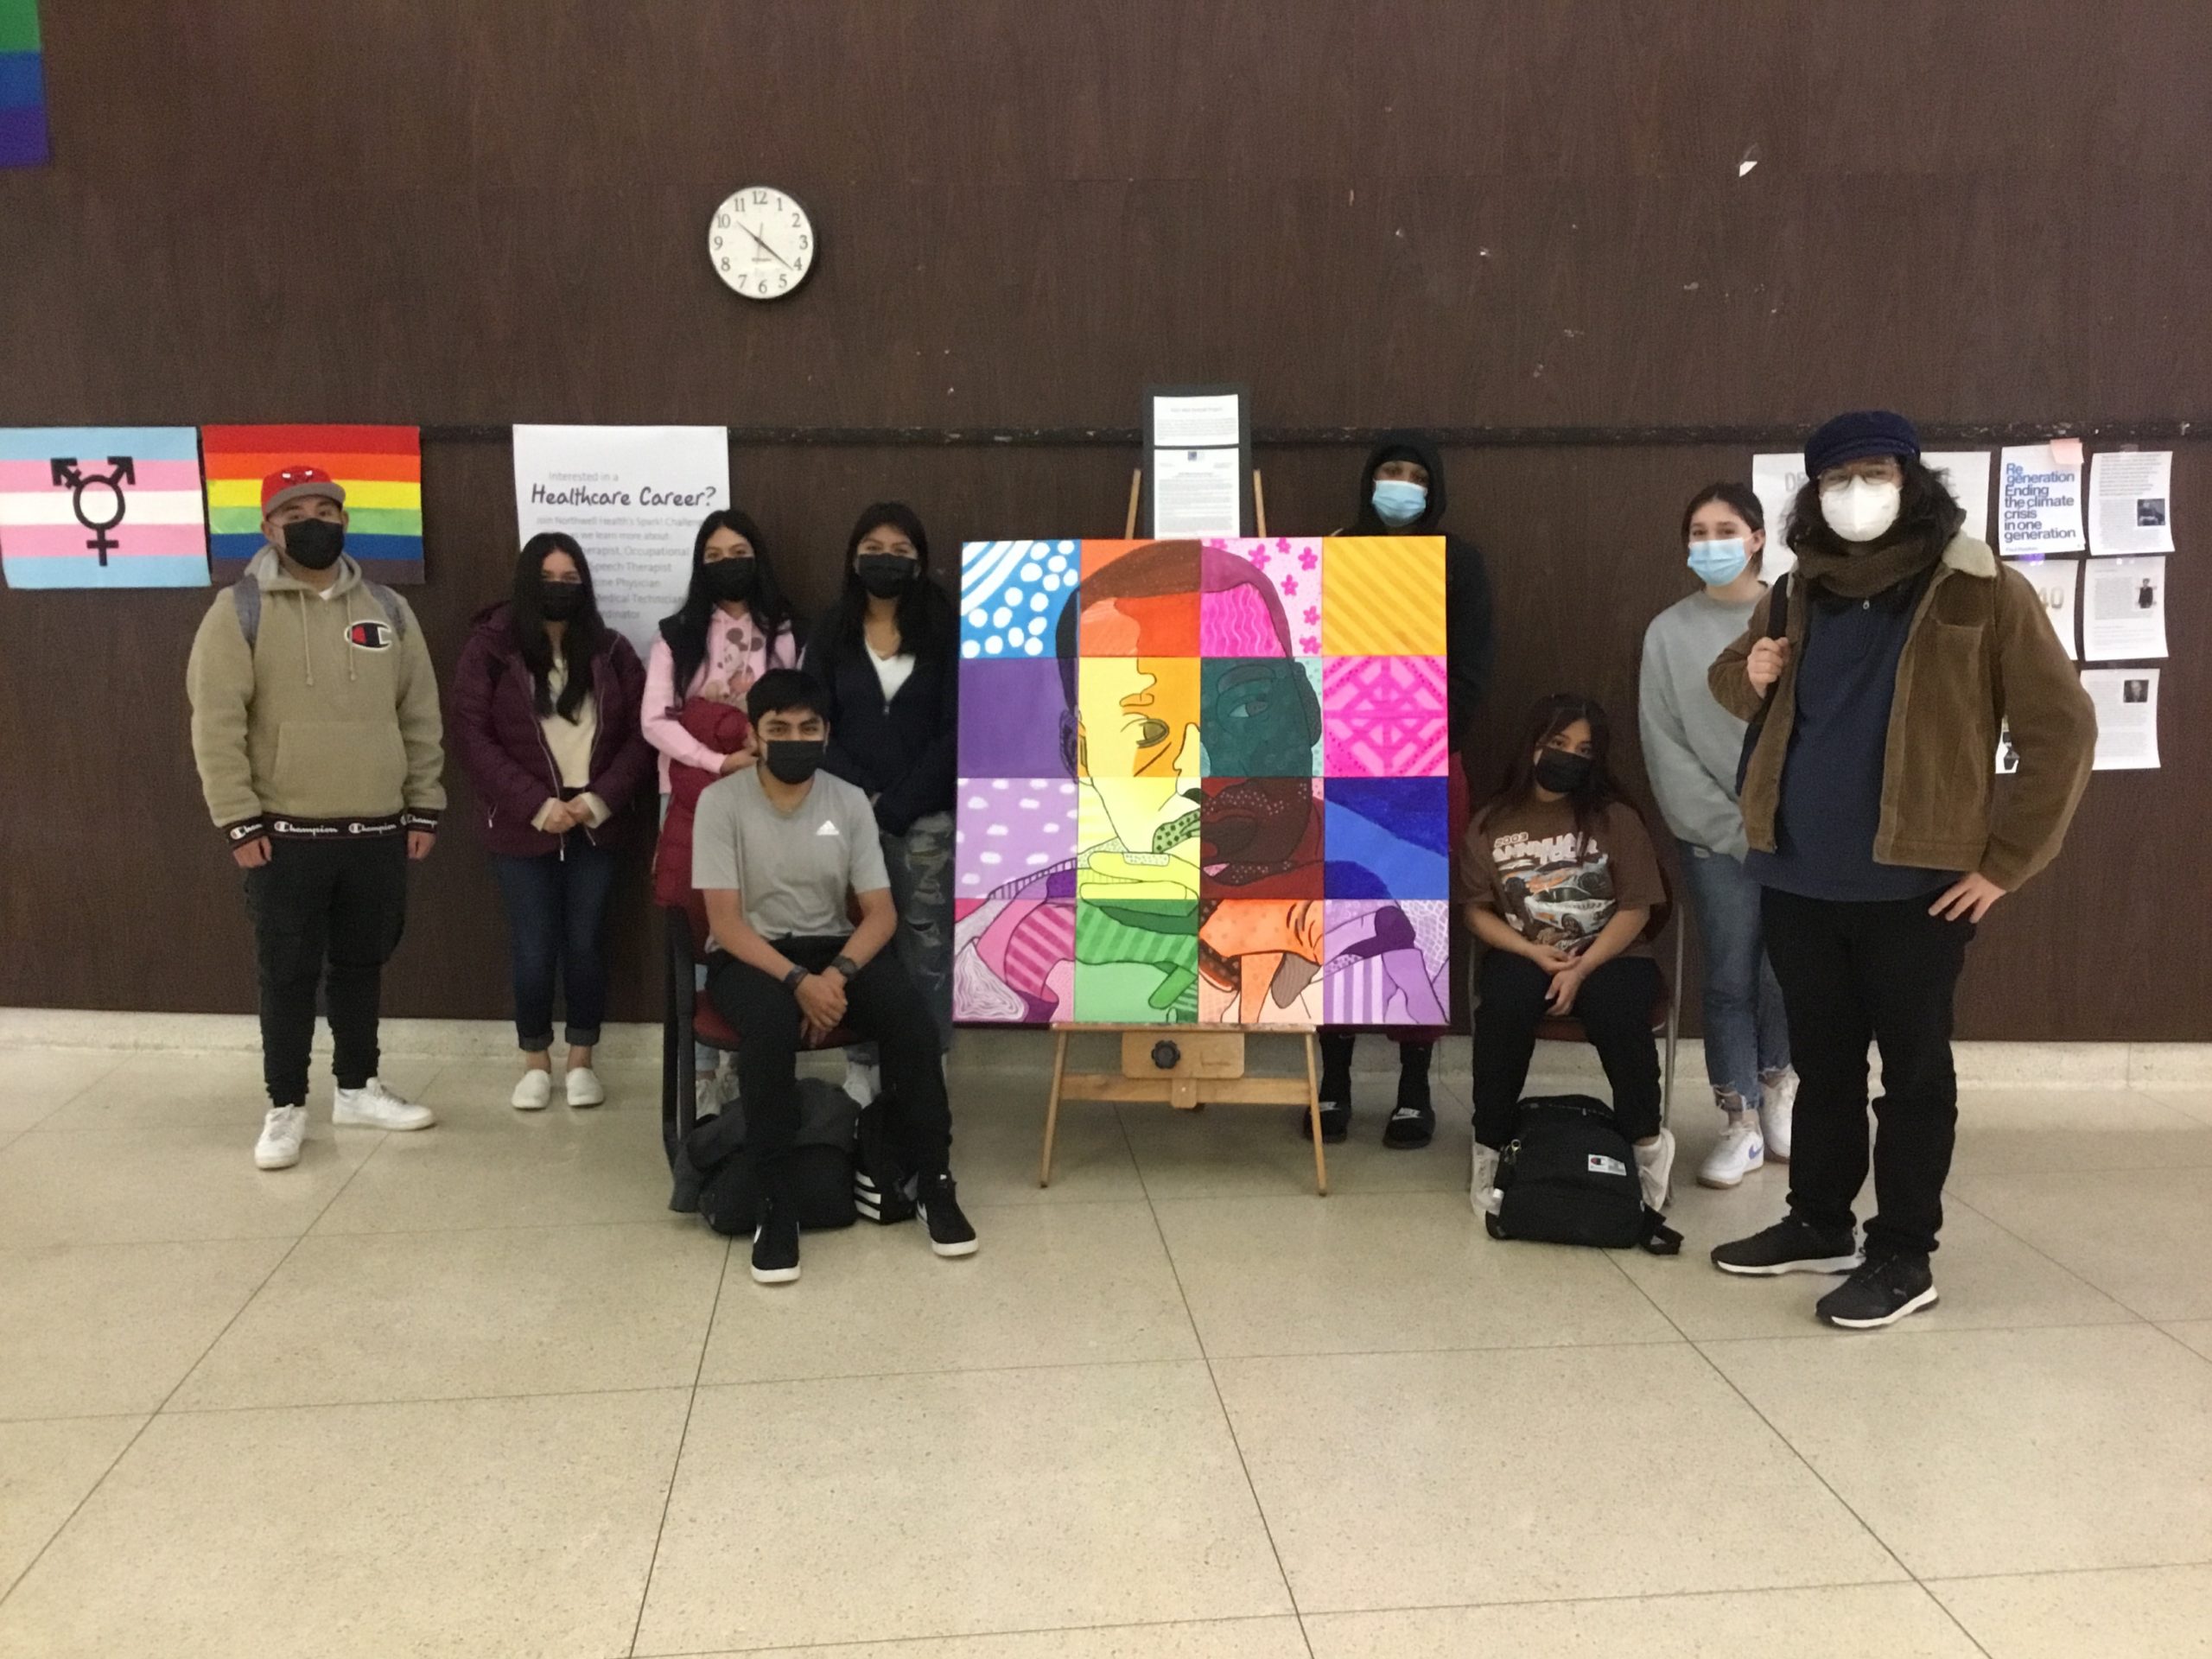 In honor of Dr. Martin Luther King Jr., Southampton High School mural
painting/set design students worked collaboratively to paint two mosaic-style portraits of the late civil rights leader. They each painted 12-inch-square canvases that were combined to form a finished 4-foot-square portrait. One of the portraits will be displayed at Southampton High School, while the other will be featured in the Parrish Art Museum’s
2022 Student Exhibitions in the spring. The initiative is part of the East End Arts and
Humanities Council’s 2022 East End Arts MLK Portrait Project, which included 11 East End
schools.